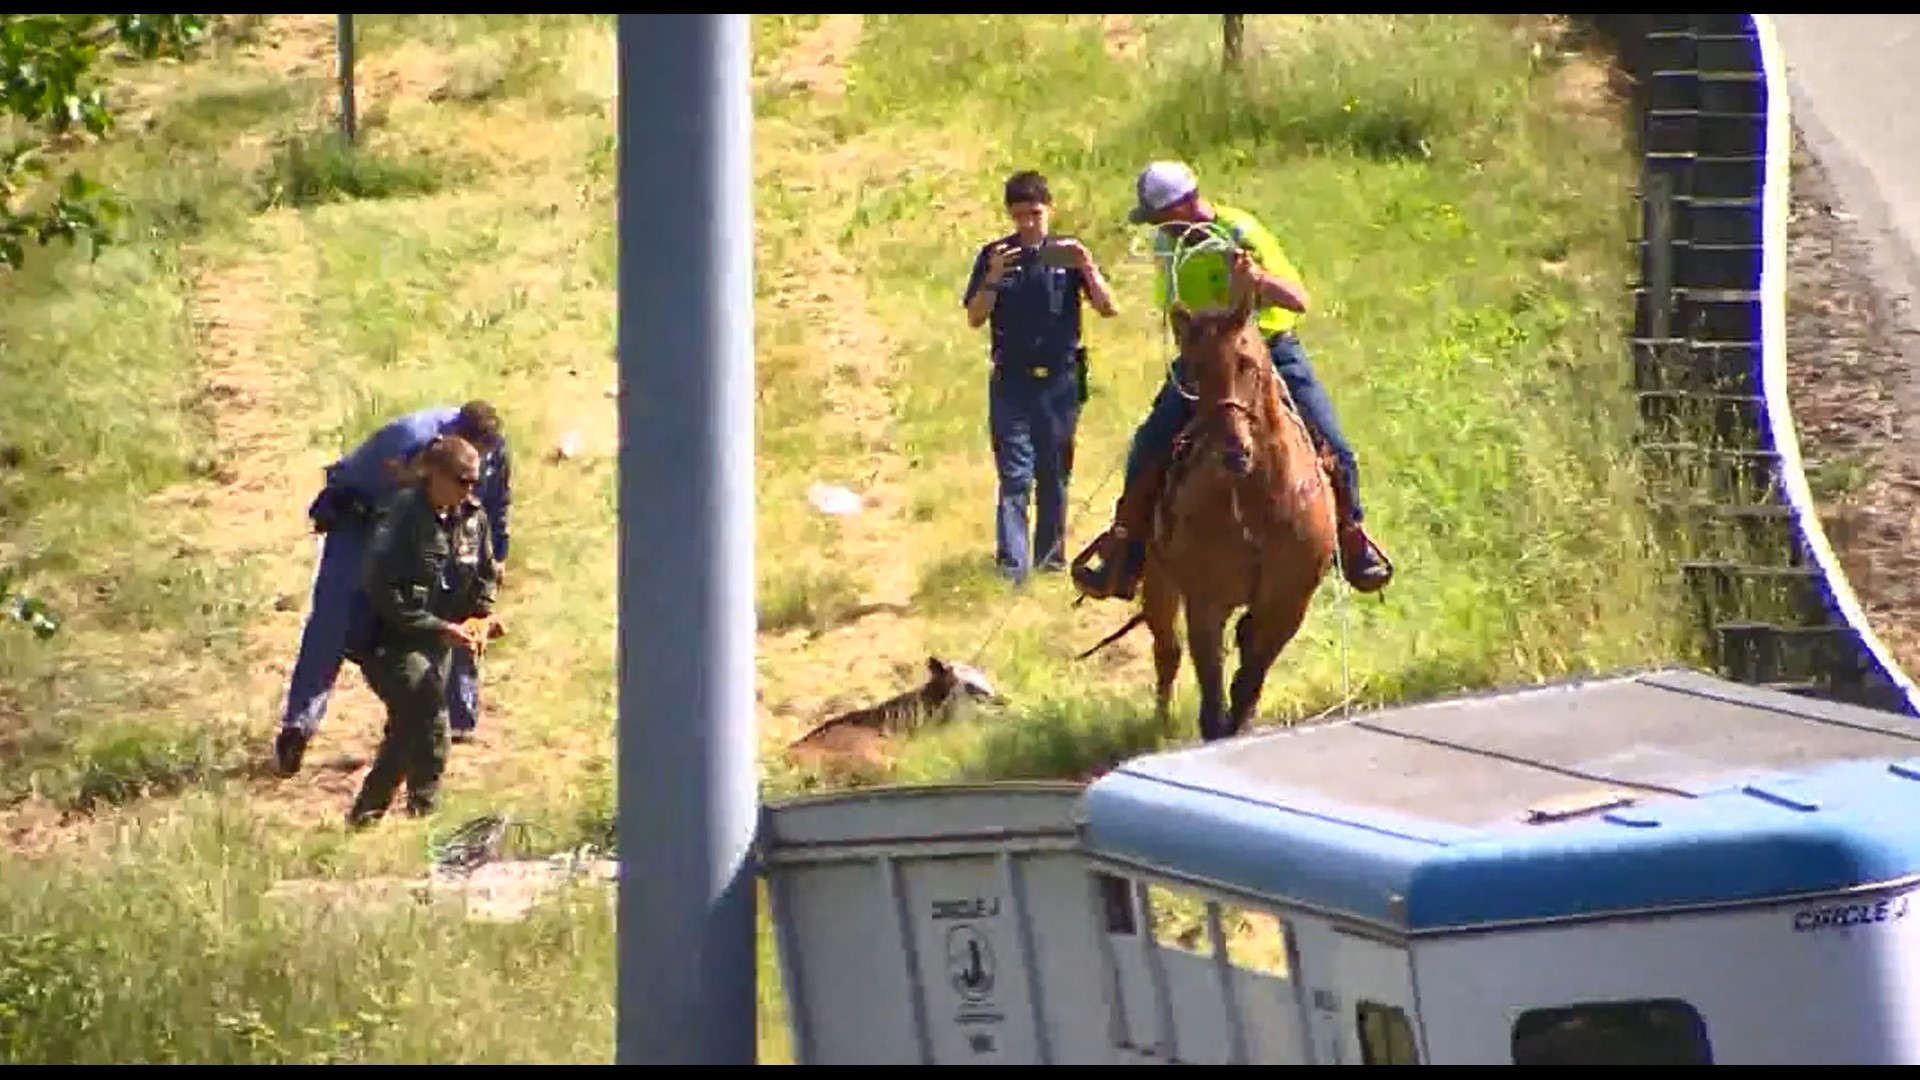 A fish and wildlife official on a horse was able to wrangle the cow, reopening the roadway.